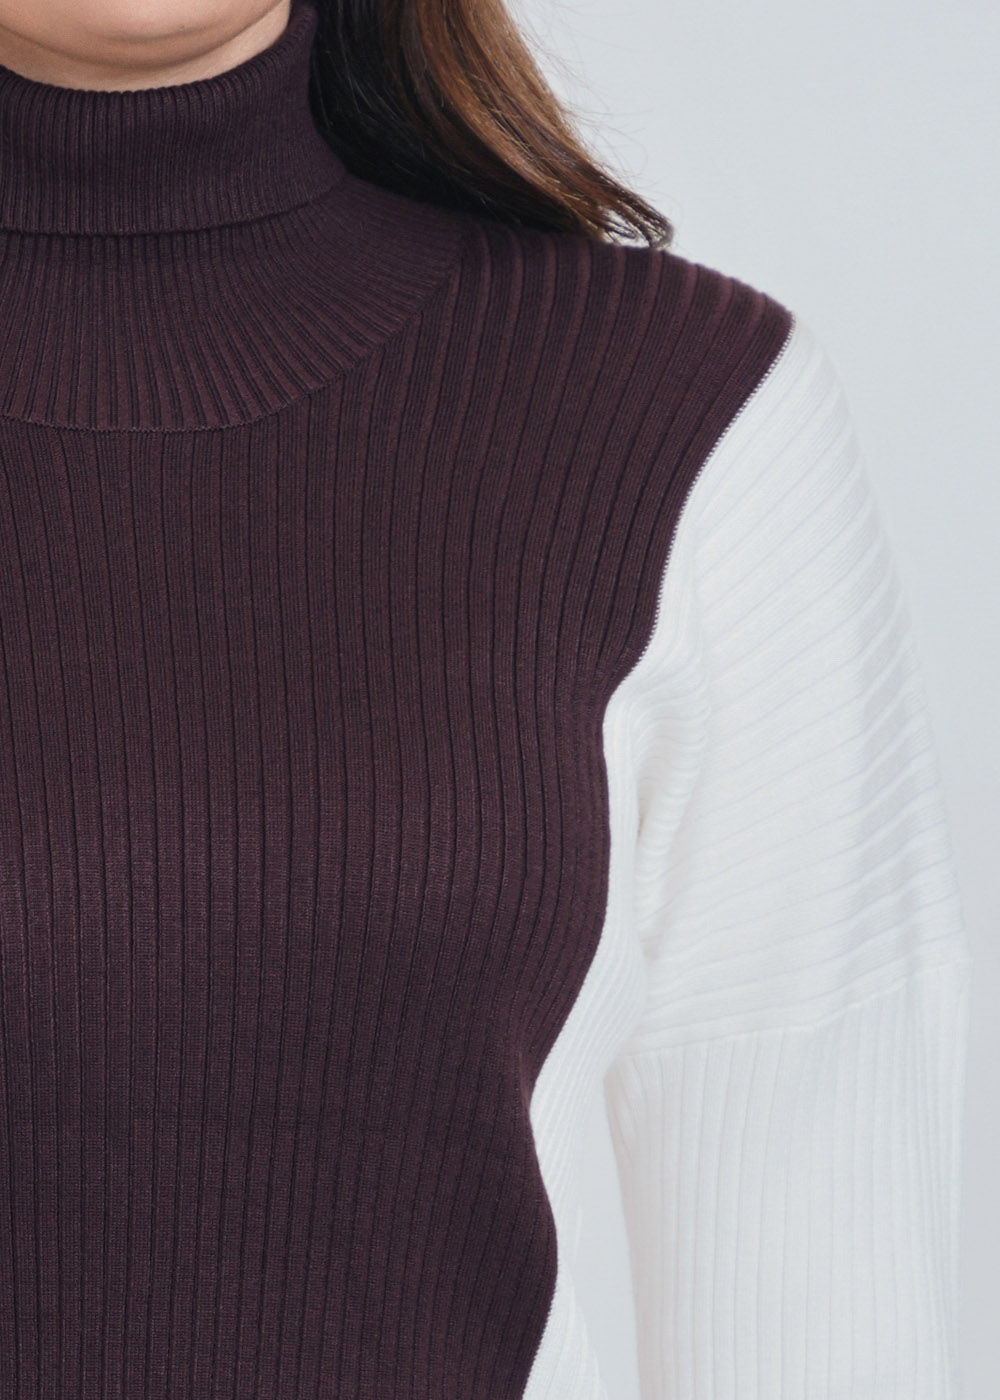 Color Block Design with Ribbed Texture Sweater